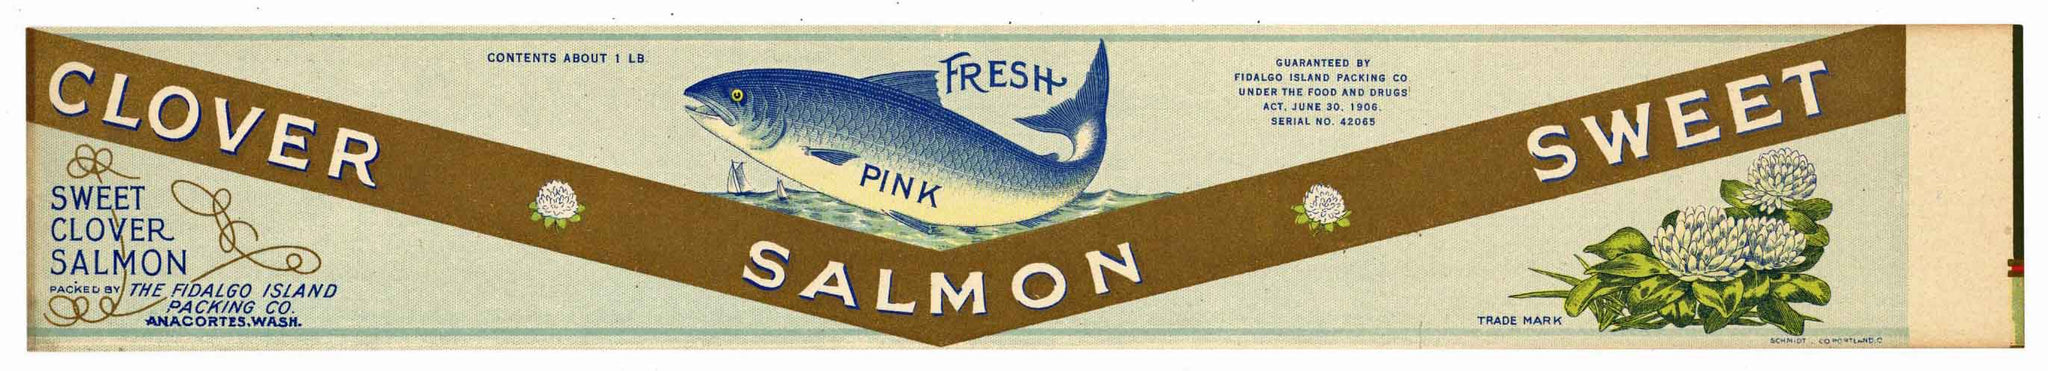 Clover Brand Vintage Salmon Can Label, large flat